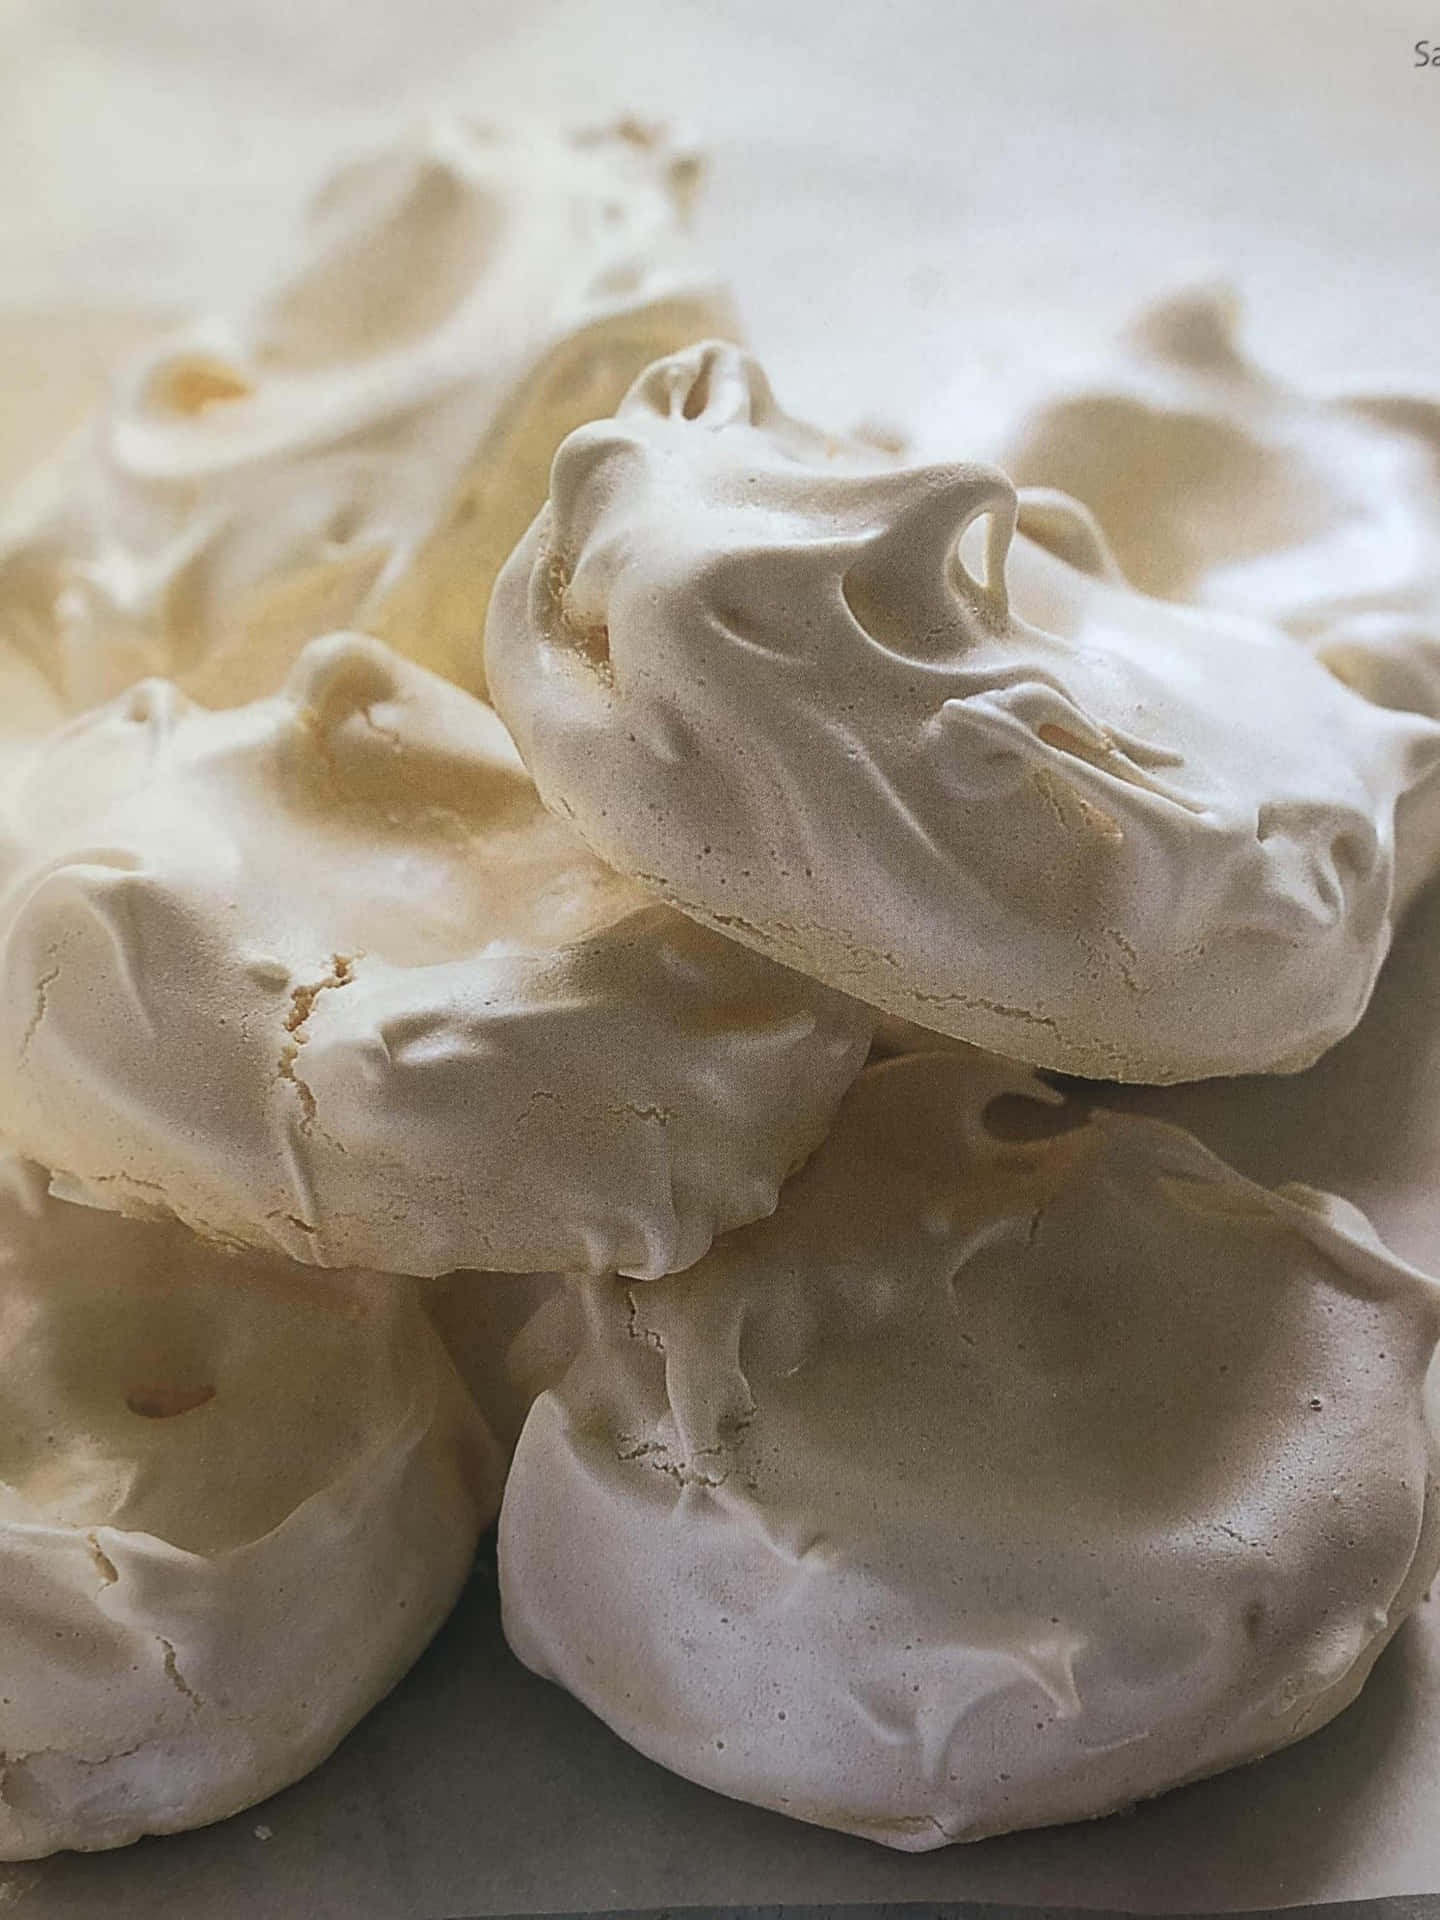 Sweet and delicious meringue with a powdered sugar top. Wallpaper